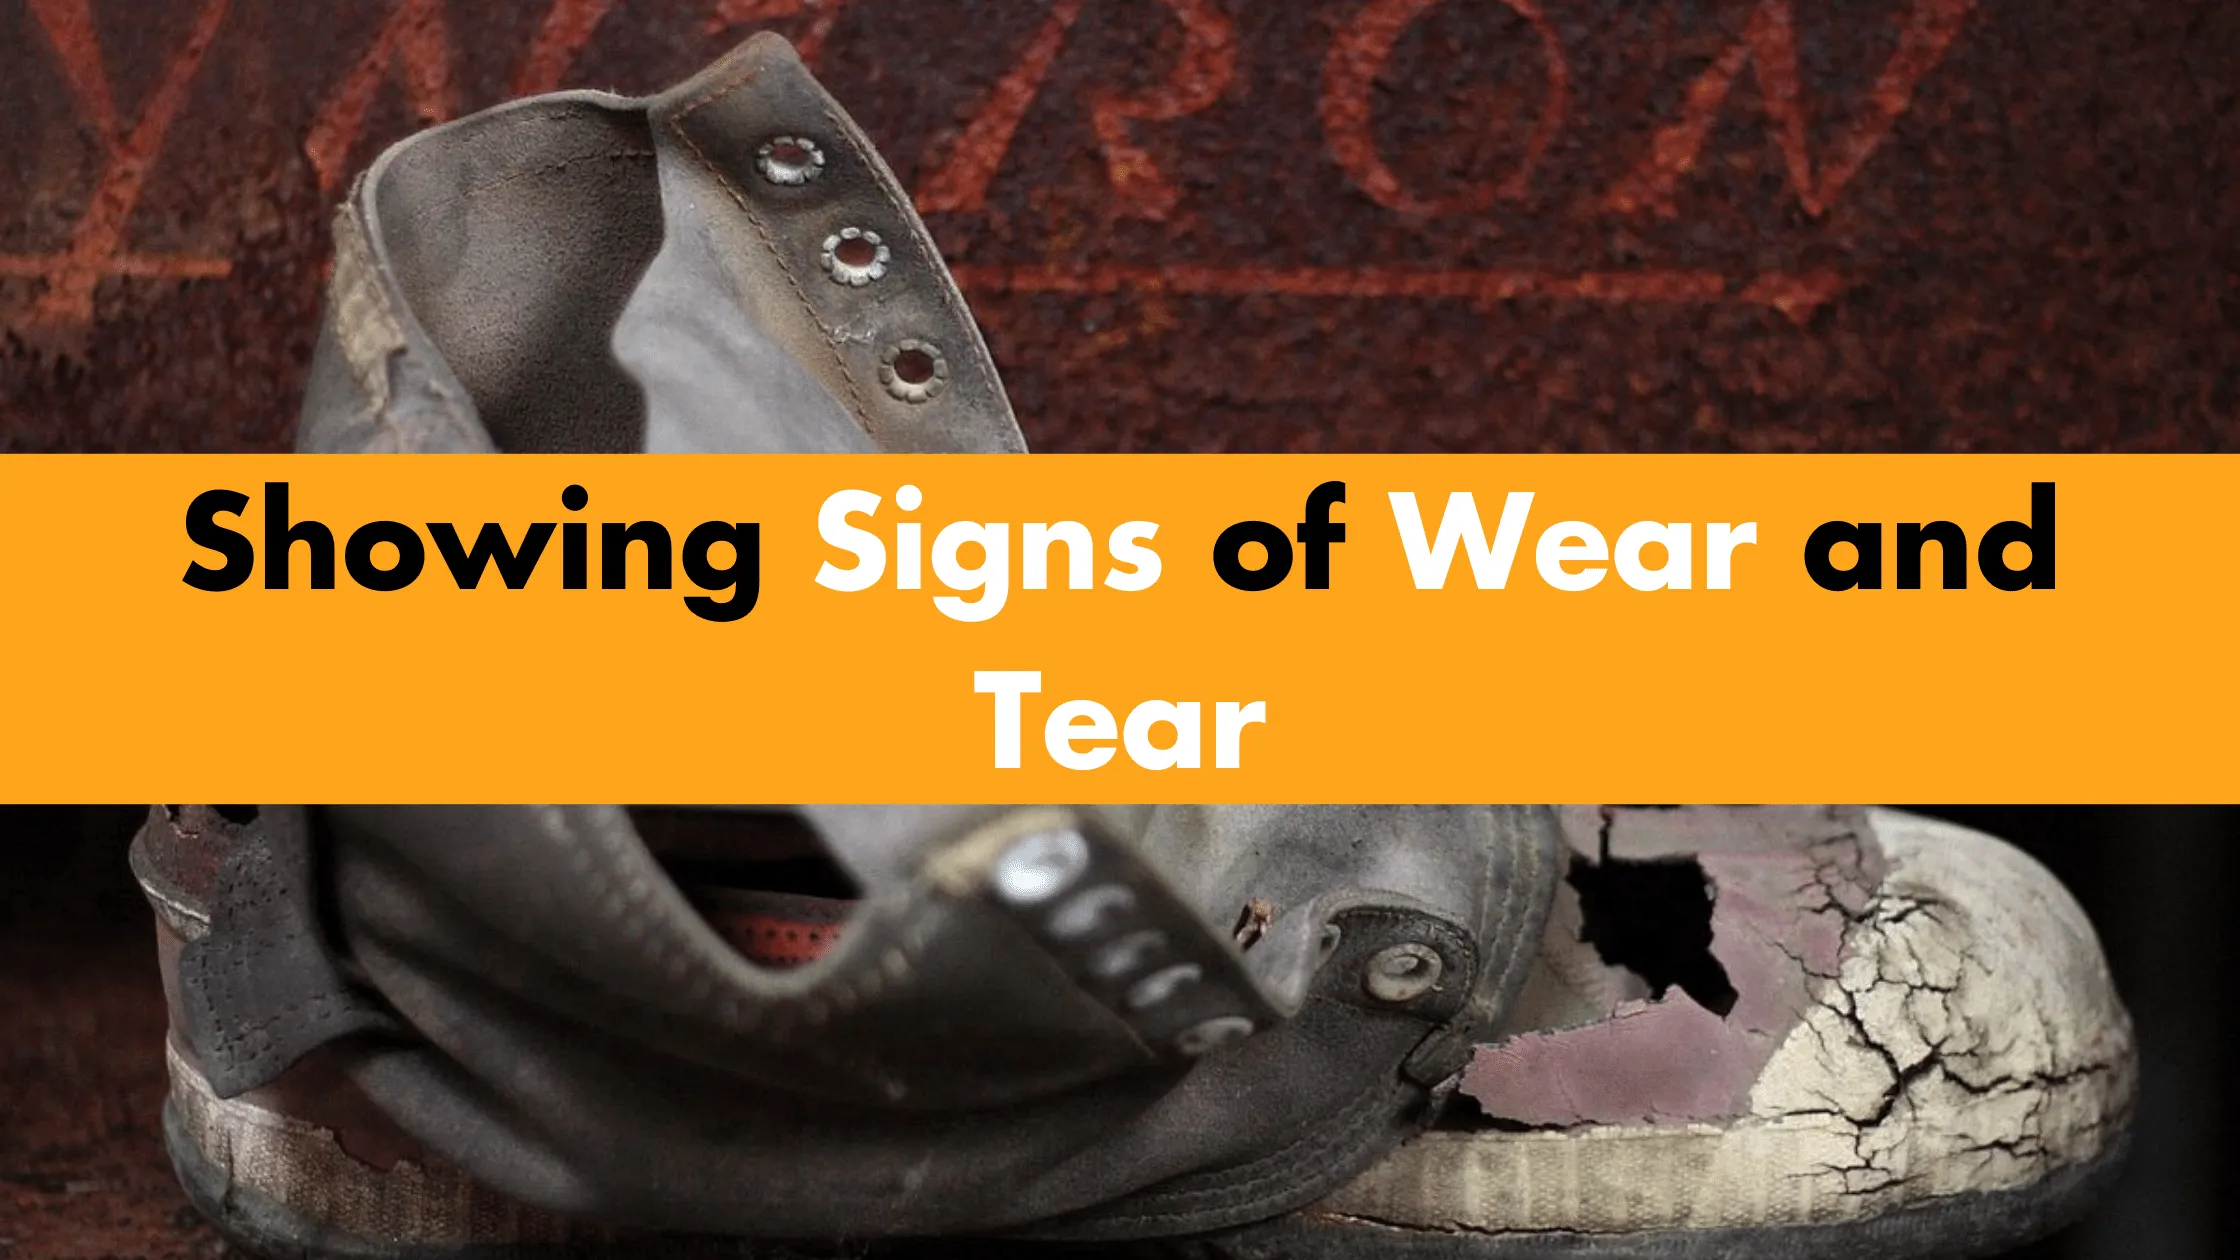 Showing Signs of Wear and Tear